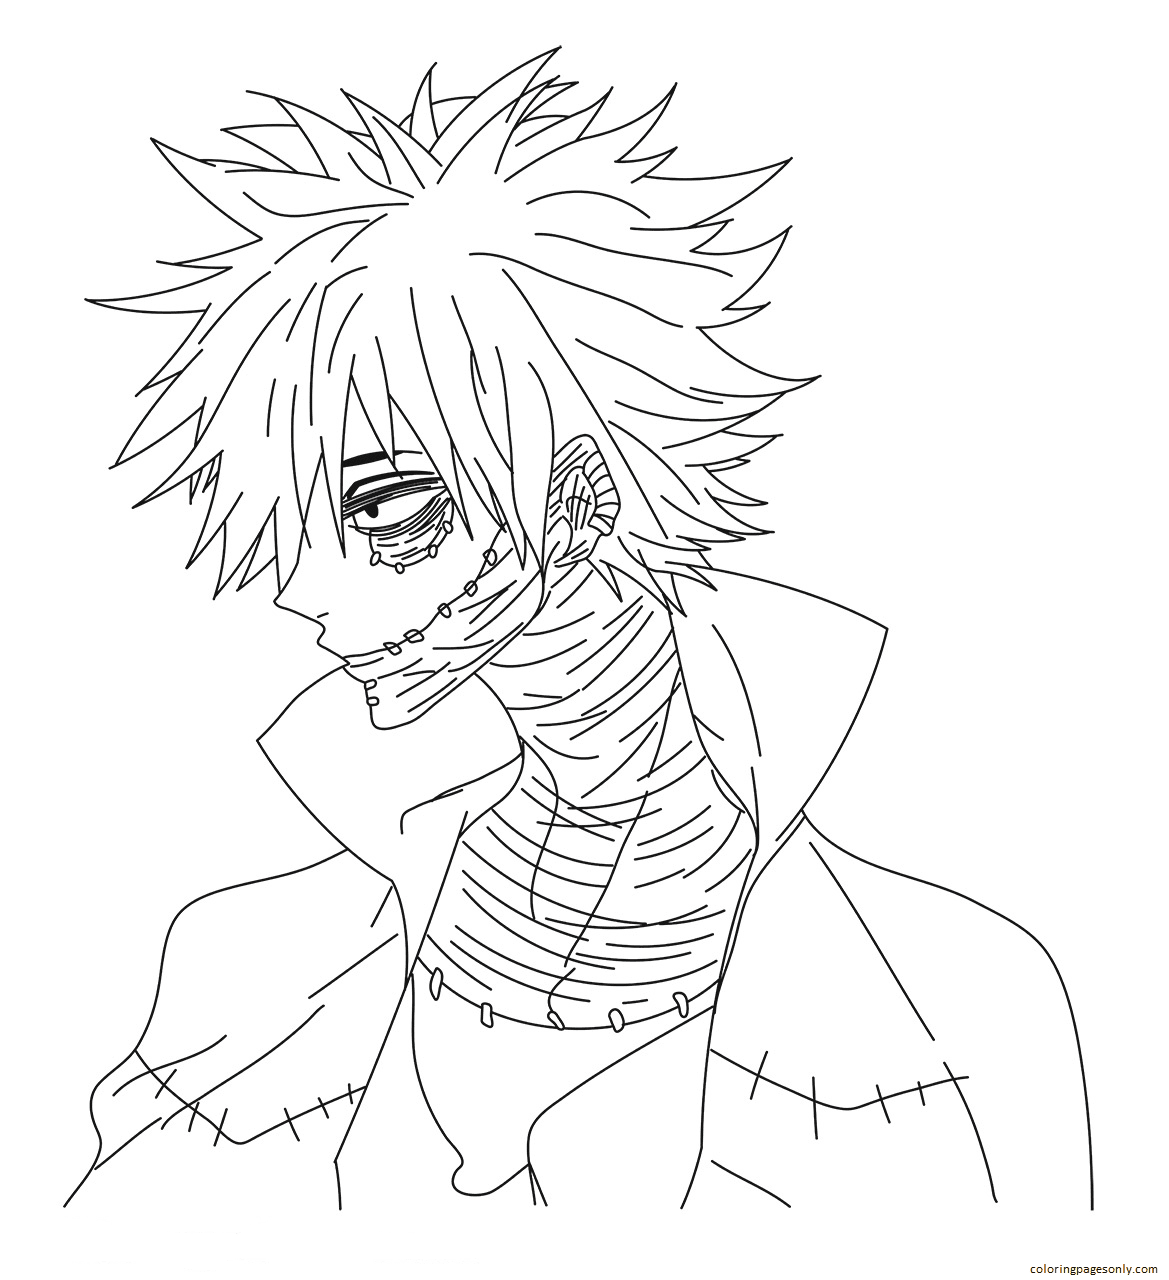 Print For Free My Hero Academia Coloring Pages   My Hero Academia ...